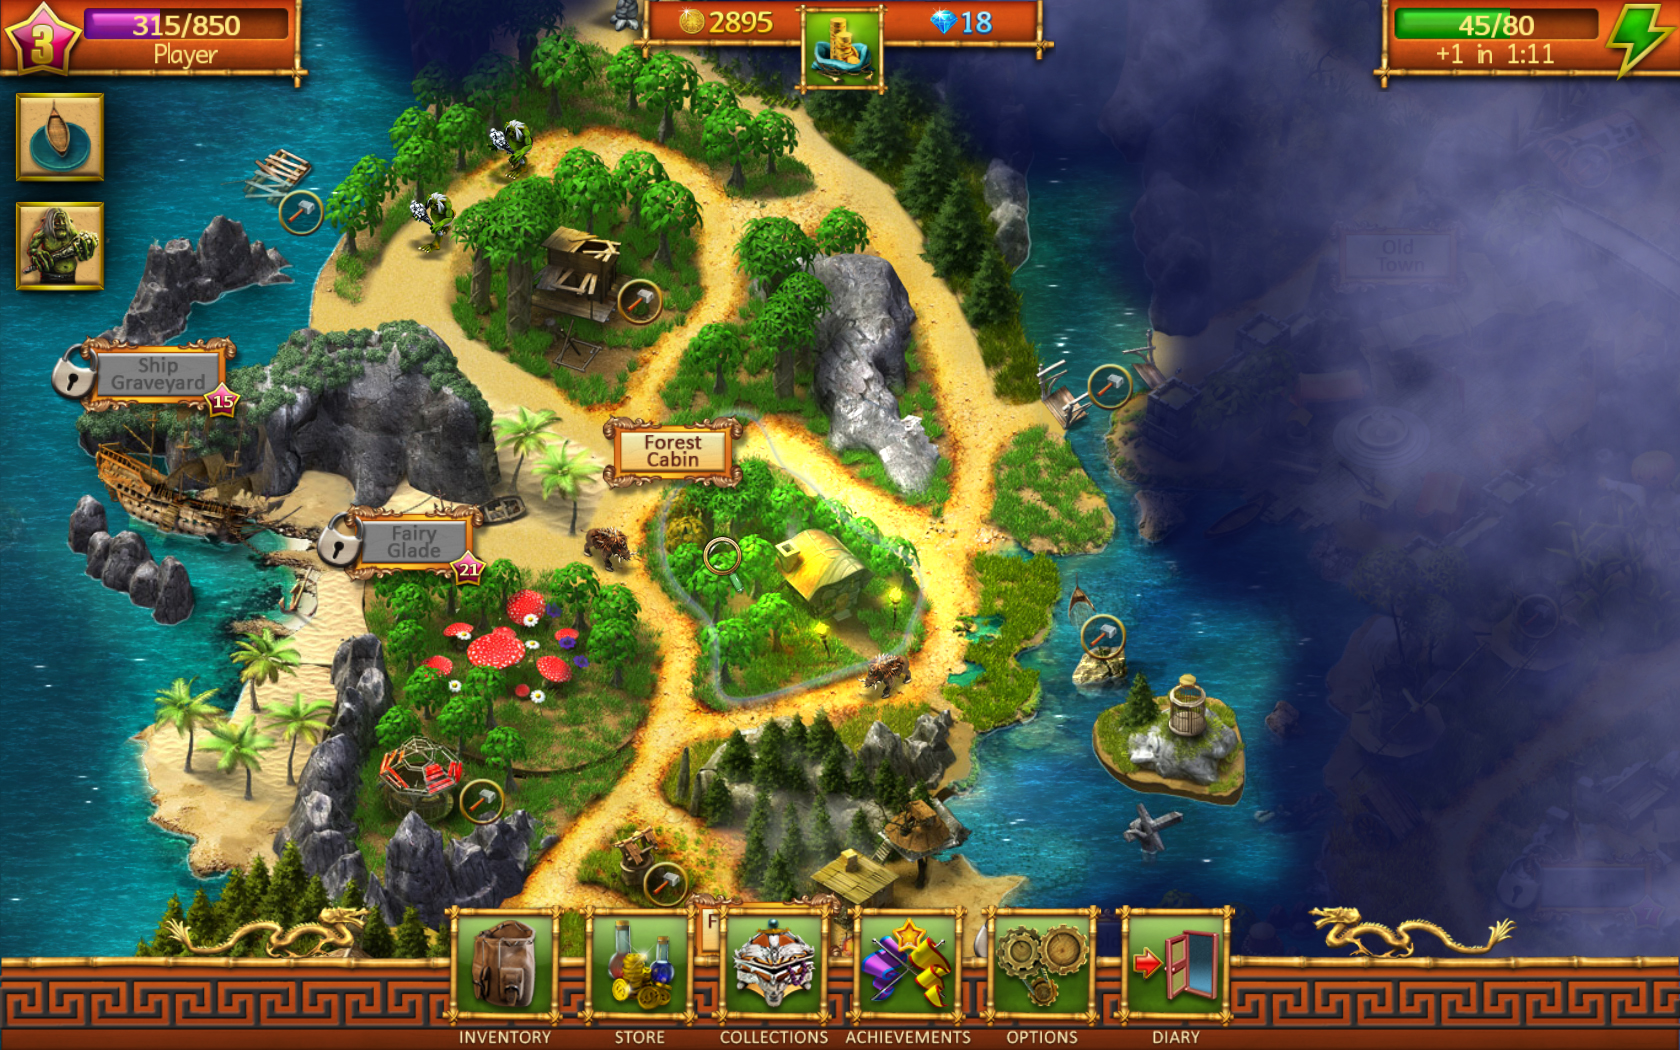 download the new for windows Lost Lands: Mahjong